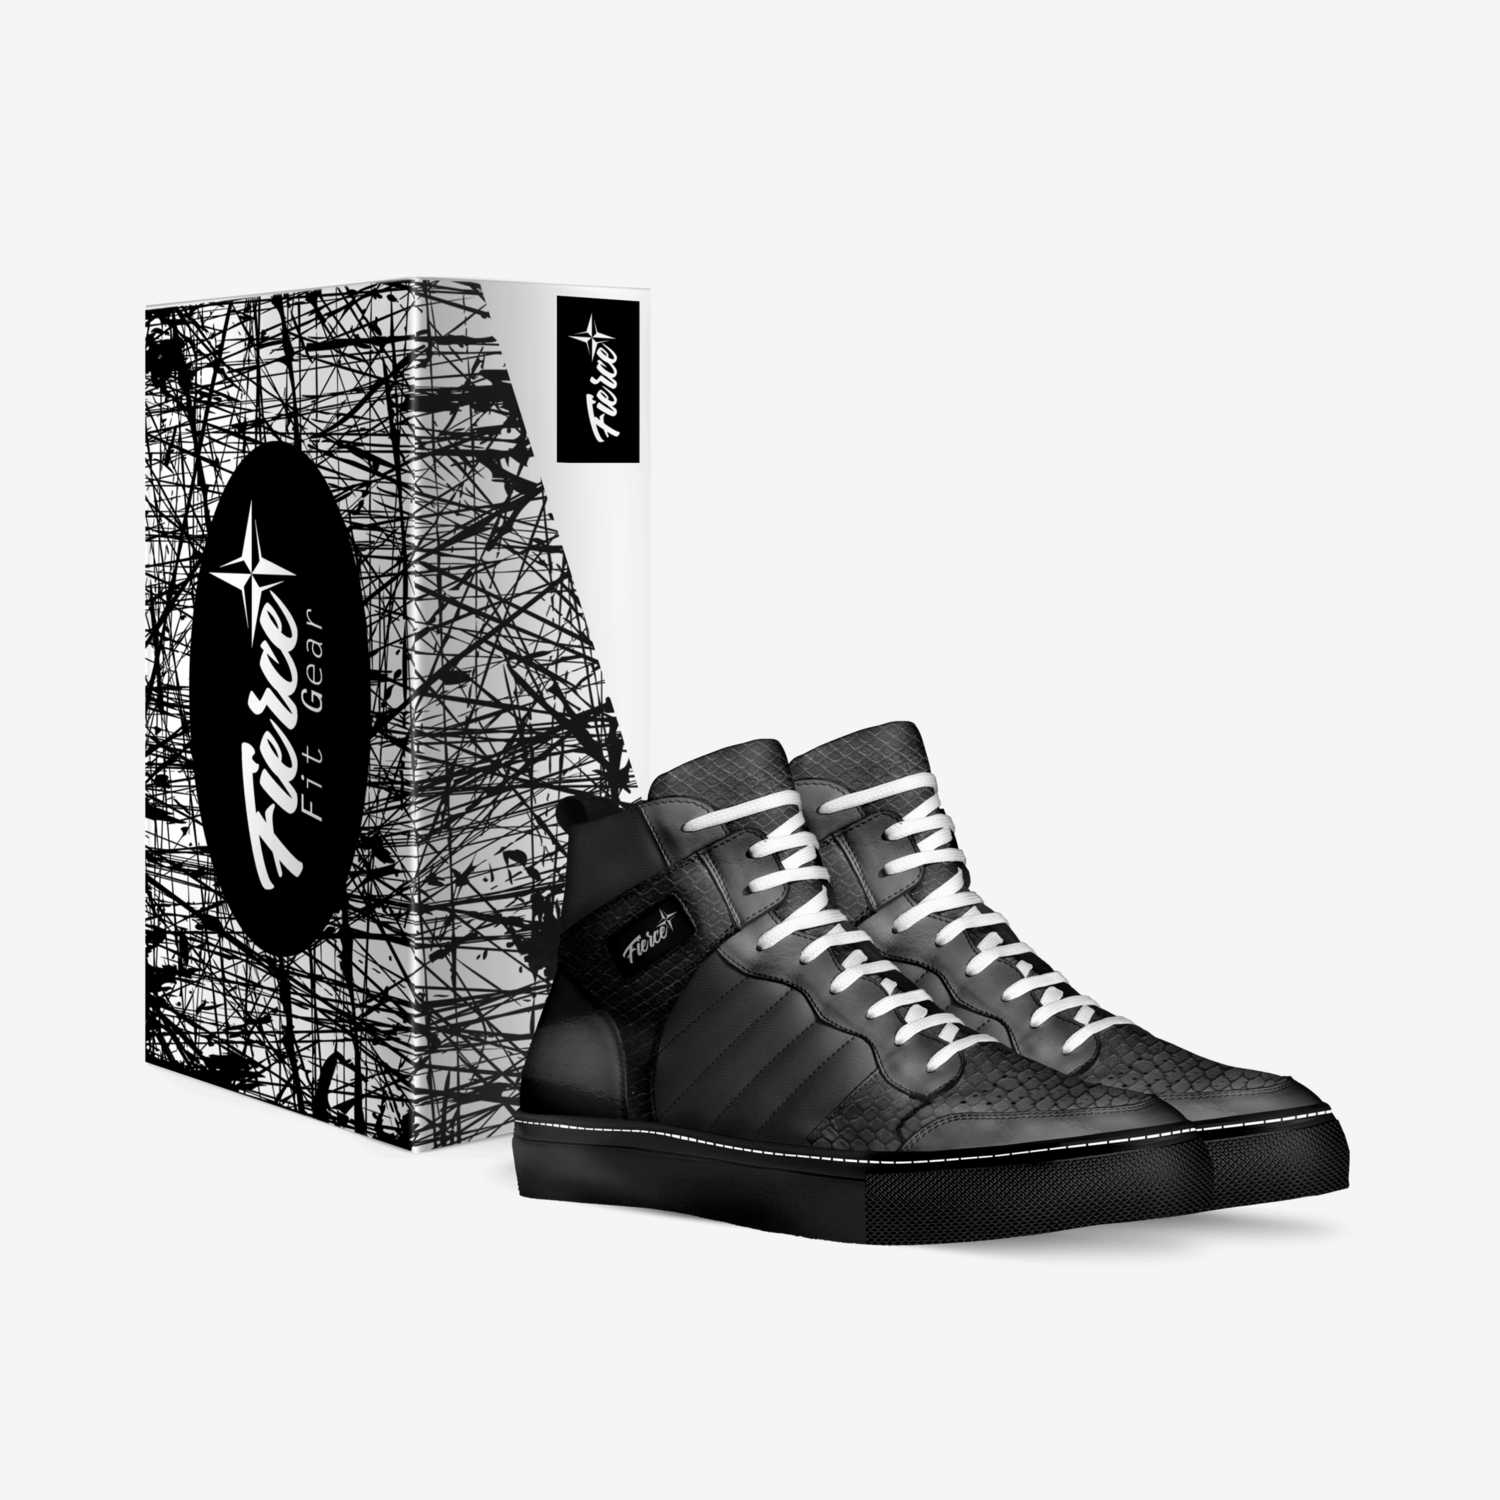 Fierce Originals custom made in Italy shoes by Fierce Fit Gear | Box view